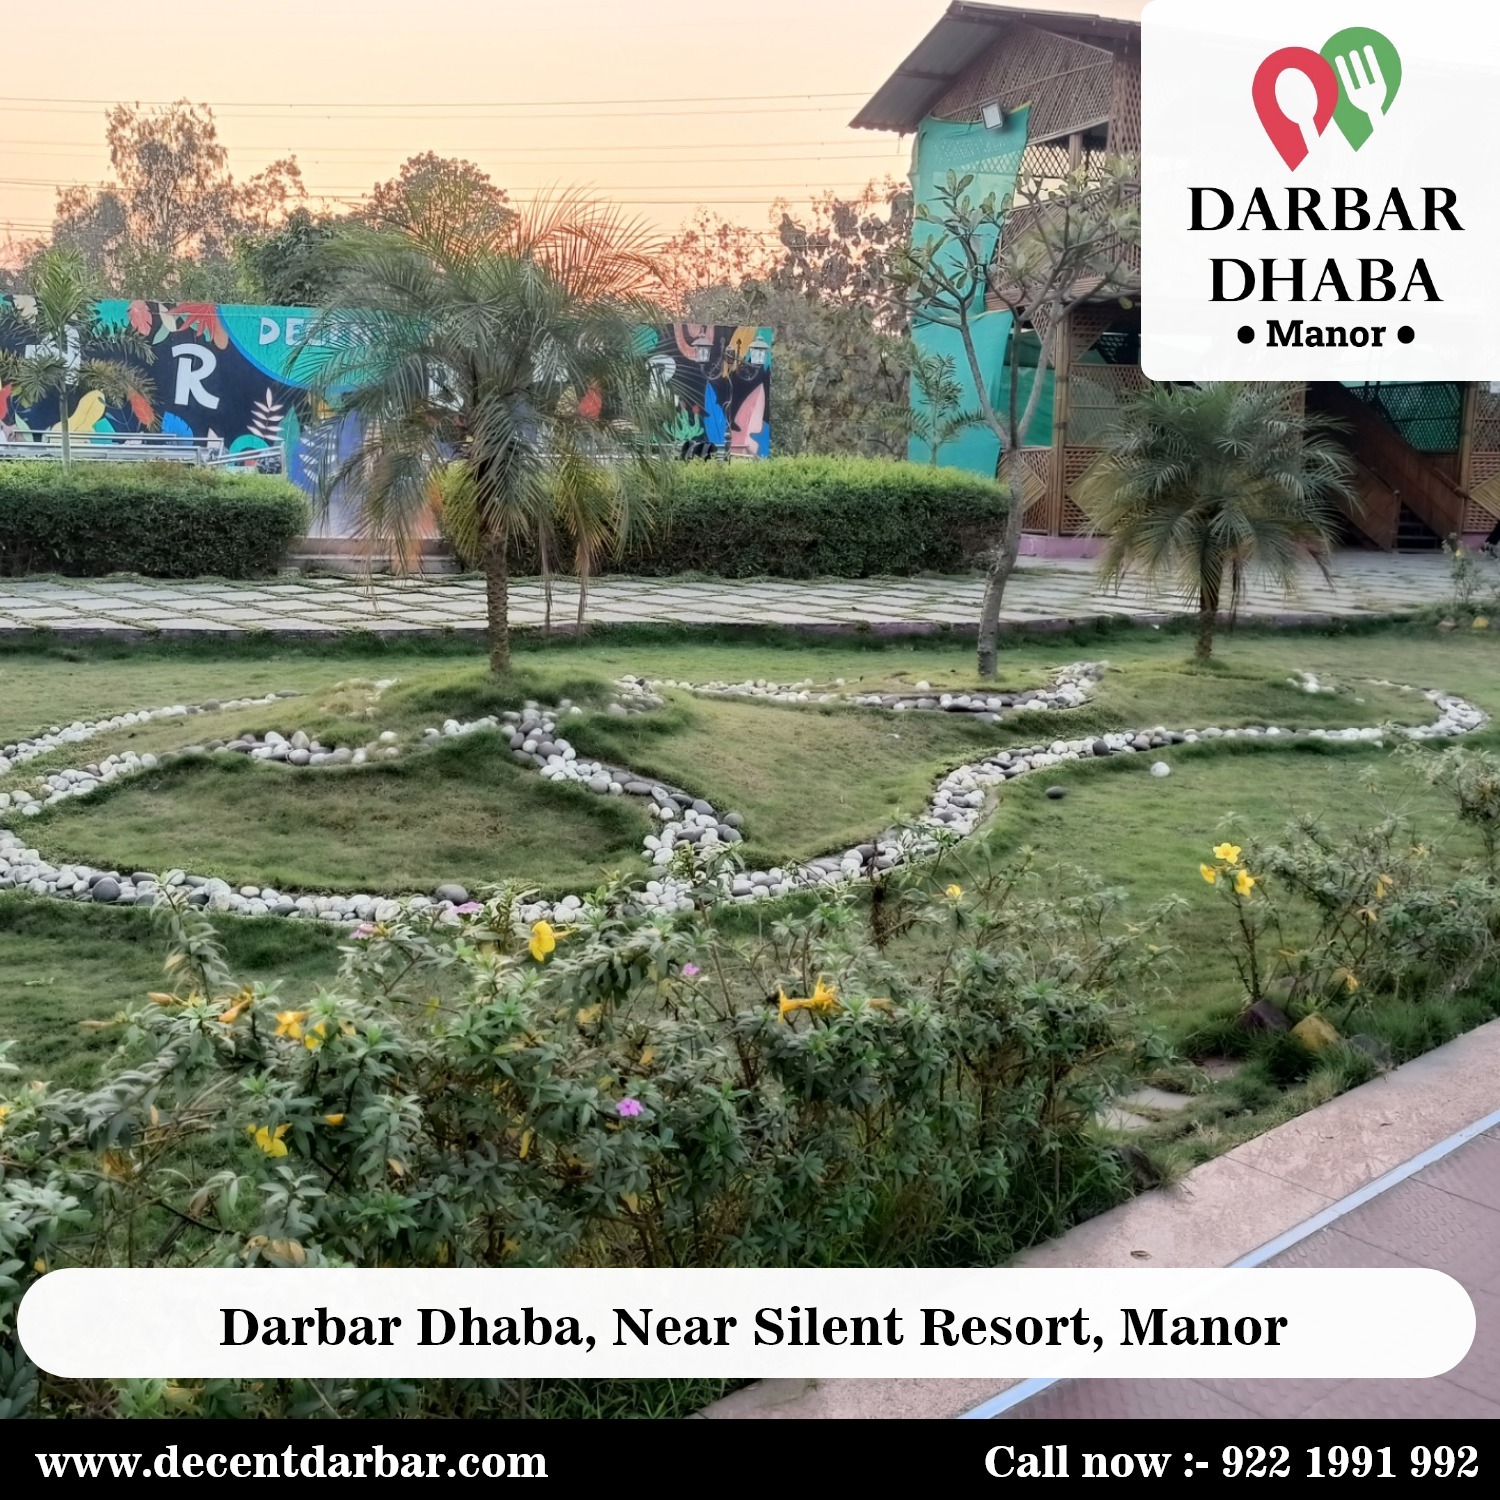 DARBAR DHABA Manor: Authentic Indian Dining Experi